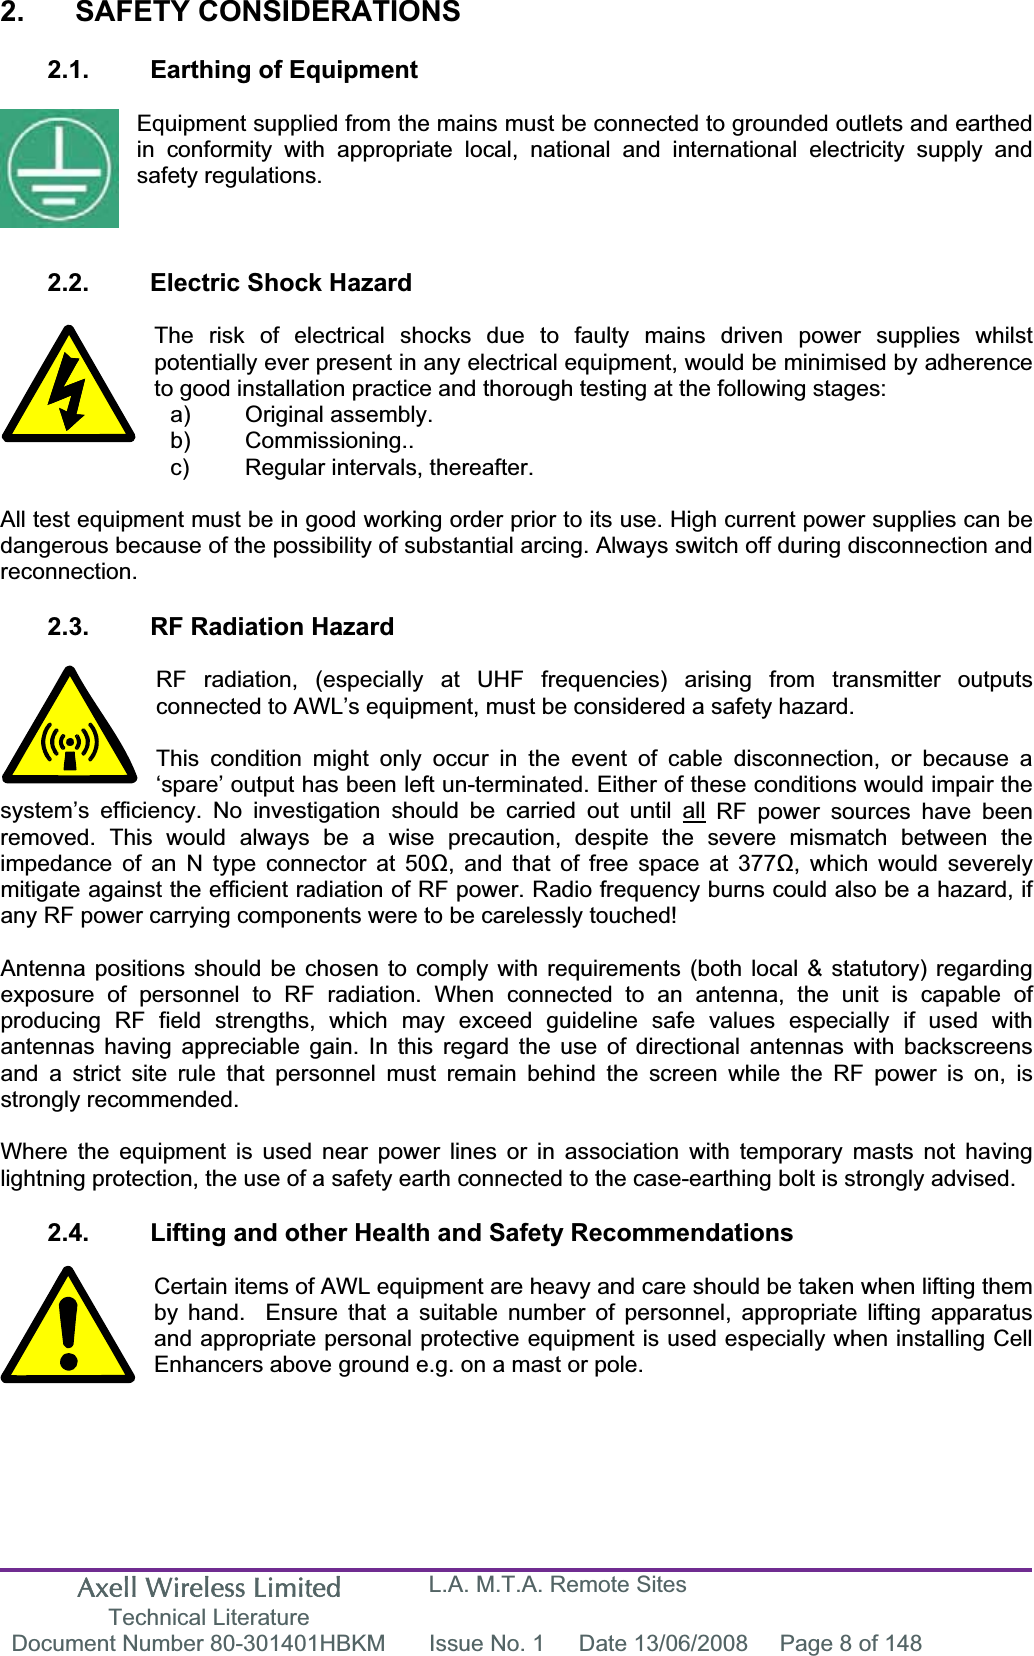 Axell Wireless Limited Technical Literature L.A. M.T.A. Remote Sites Document Number 80-301401HBKM  Issue No. 1  Date 13/06/2008  Page 8 of 148 2. SAFETY CONSIDERATIONS 2.1.  Earthing of Equipment Equipment supplied from the mains must be connected to grounded outlets and earthed in conformity with appropriate local, national and international electricity supply and safety regulations. 2.2.  Electric Shock Hazard The risk of electrical shocks due to faulty mains driven power supplies whilst potentially ever present in any electrical equipment, would be minimised by adherence to good installation practice and thorough testing at the following stages: All test equipment must be in good working order prior to its use. High current power supplies can be dangerous because of the possibility of substantial arcing. Always switch off during disconnection and reconnection.2.3.  RF Radiation Hazard RF radiation, (especially at UHF frequencies) arising from transmitter outputs connected to AWL’s equipment, must be considered a safety hazard. This condition might only occur in the event of cable disconnection, or because a ‘spare’ output has been left un-terminated. Either of these conditions would impair the system’s efficiency. No investigation should be carried out until all RF power sources have been removed. This would always be a wise precaution, despite the severe mismatch between the impedance of an N type connector at 50, and that of free space at 377, which would severely mitigate against the efficient radiation of RF power. Radio frequency burns could also be a hazard, if any RF power carrying components were to be carelessly touched! Antenna positions should be chosen to comply with requirements (both local &amp; statutory) regarding exposure of personnel to RF radiation. When connected to an antenna, the unit is capable of producing RF field strengths, which may exceed guideline safe values especially if used with antennas having appreciable gain. In this regard the use of directional antennas with backscreens and a strict site rule that personnel must remain behind the screen while the RF power is on, is strongly recommended. Where the equipment is used near power lines or in association with temporary masts not having lightning protection, the use of a safety earth connected to the case-earthing bolt is strongly advised. 2.4.  Lifting and other Health and Safety Recommendations Certain items of AWL equipment are heavy and care should be taken when lifting them by hand.  Ensure that a suitable number of personnel, appropriate lifting apparatus and appropriate personal protective equipment is used especially when installing Cell Enhancers above ground e.g. on a mast or pole.a) Original assembly. b) Commissioning.. c)  Regular intervals, thereafter. 